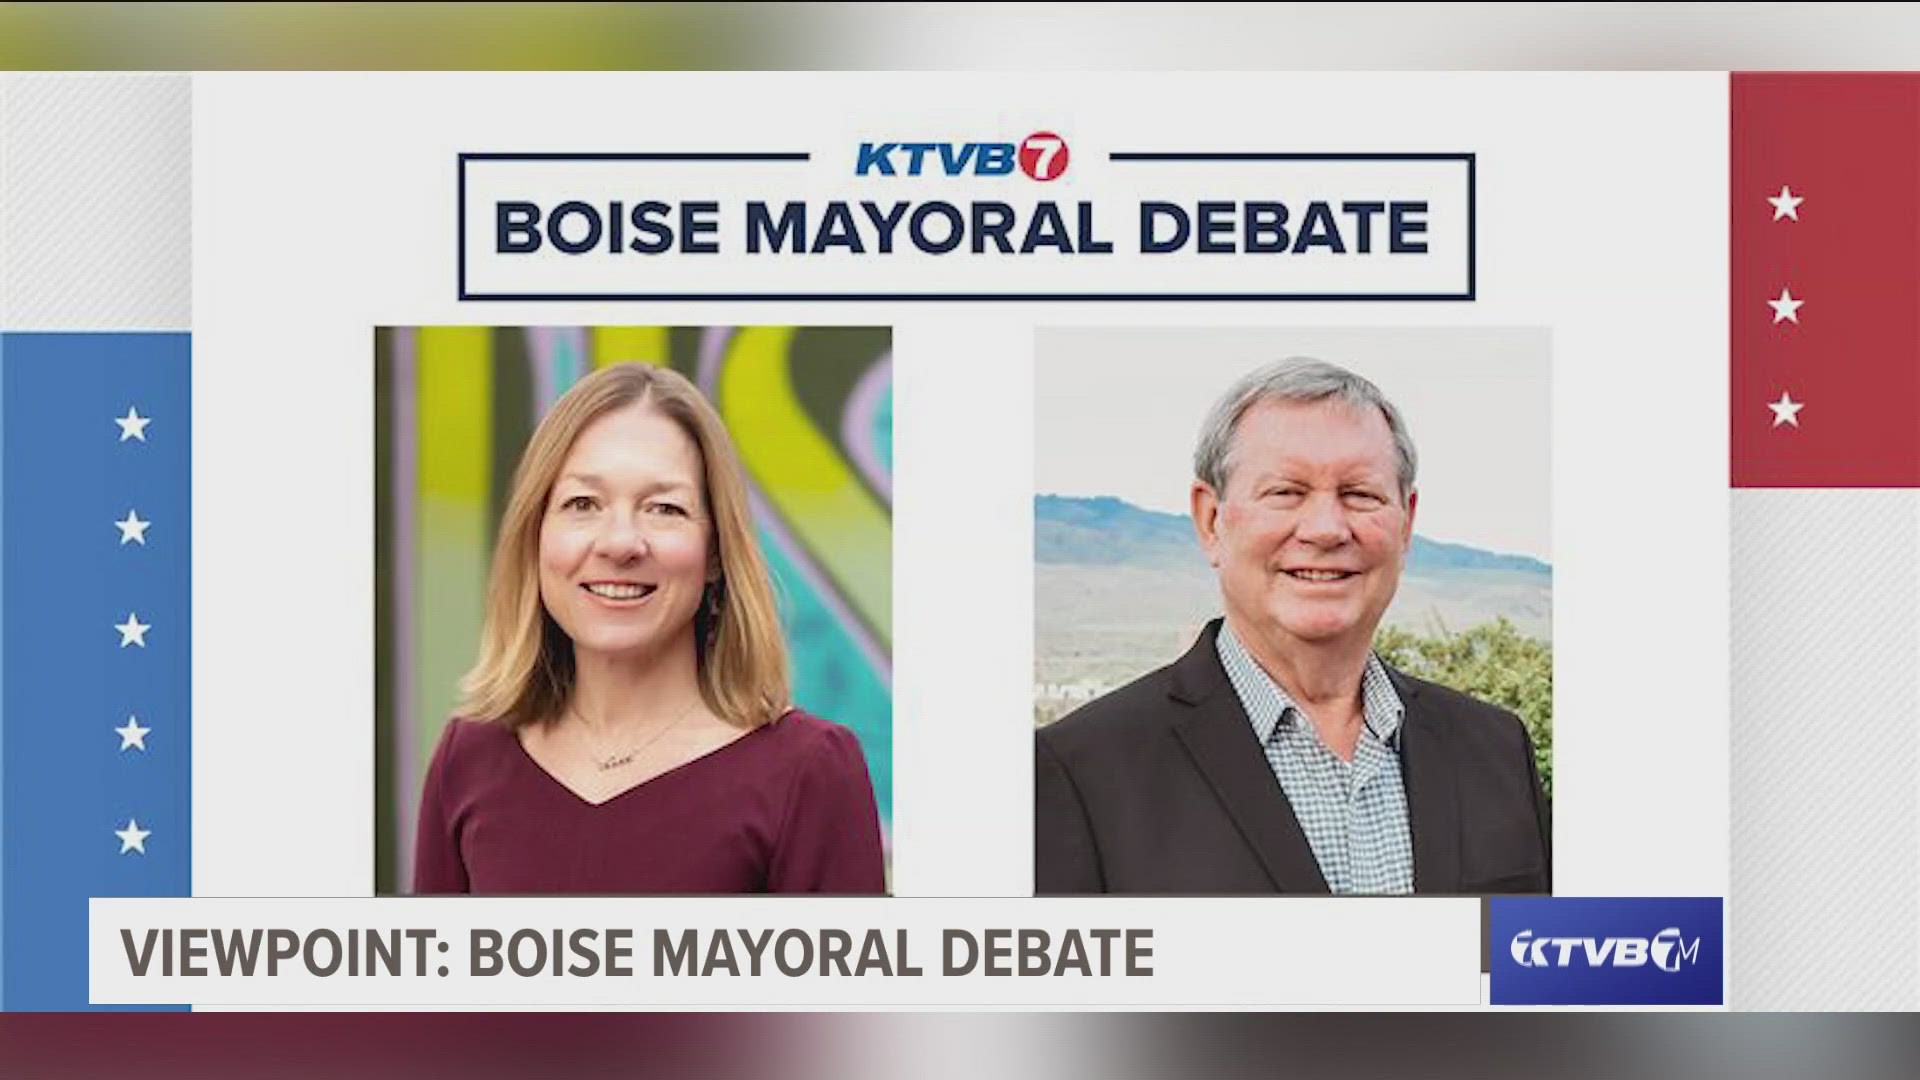 Host Joe Parris dives into the hour-long debate that touched on major topics for the people of Boise.